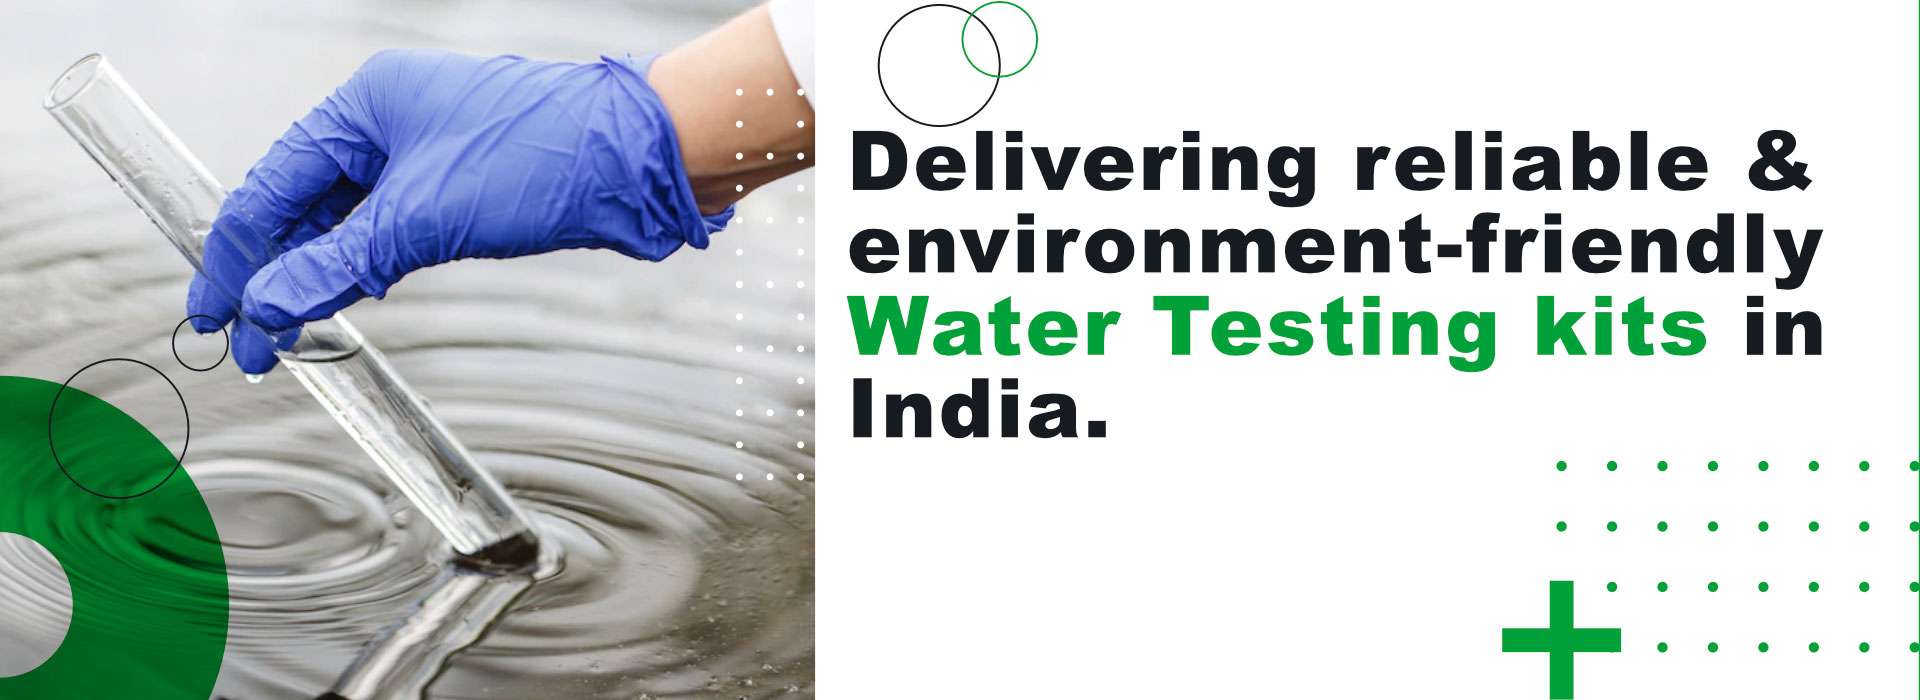  Delivering reliable & environment-friendly water Testing kits in India Manufacturers in Mumbai